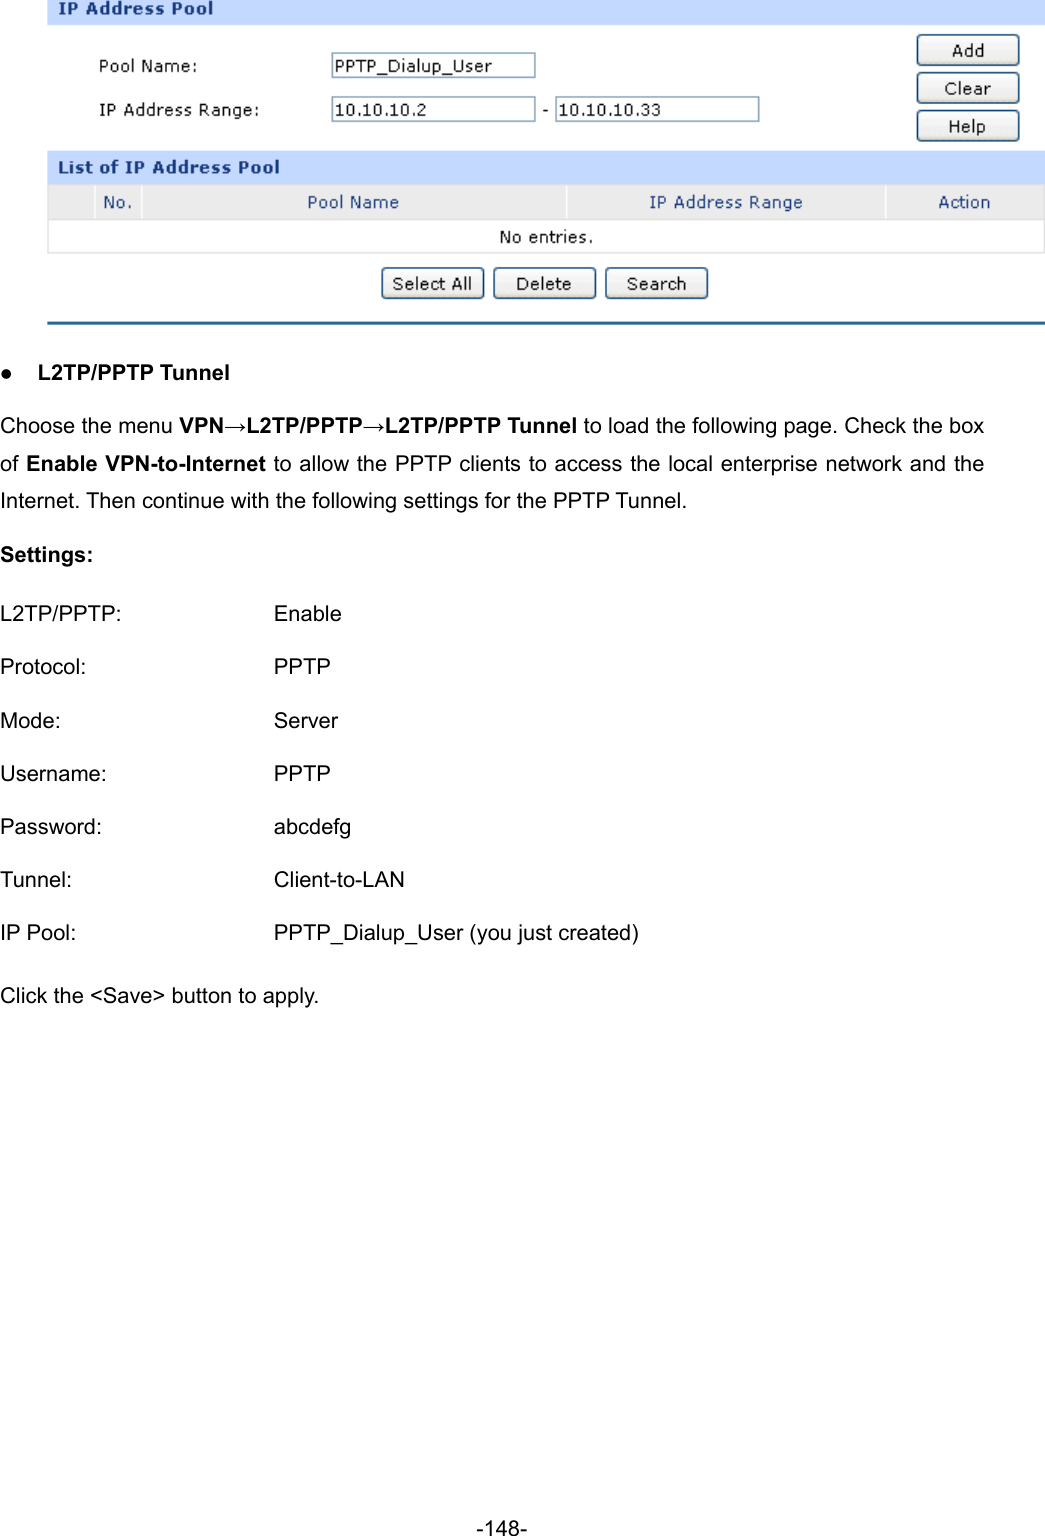  -148-  z L2TP/PPTP Tunnel Choose the menu VPN→L2TP/PPTP→L2TP/PPTP Tunnel to load the following page. Check the box of Enable VPN-to-Internet to allow the PPTP clients to access the local enterprise network and the Internet. Then continue with the following settings for the PPTP Tunnel. Settings: L2TP/PPTP: Enable Protocol: PPTP Mode: Server Username: PPTP Password: abcdefg Tunnel: Client-to-LAN IP Pool:  PPTP_Dialup_User (you just created) Click the &lt;Save&gt; button to apply. 